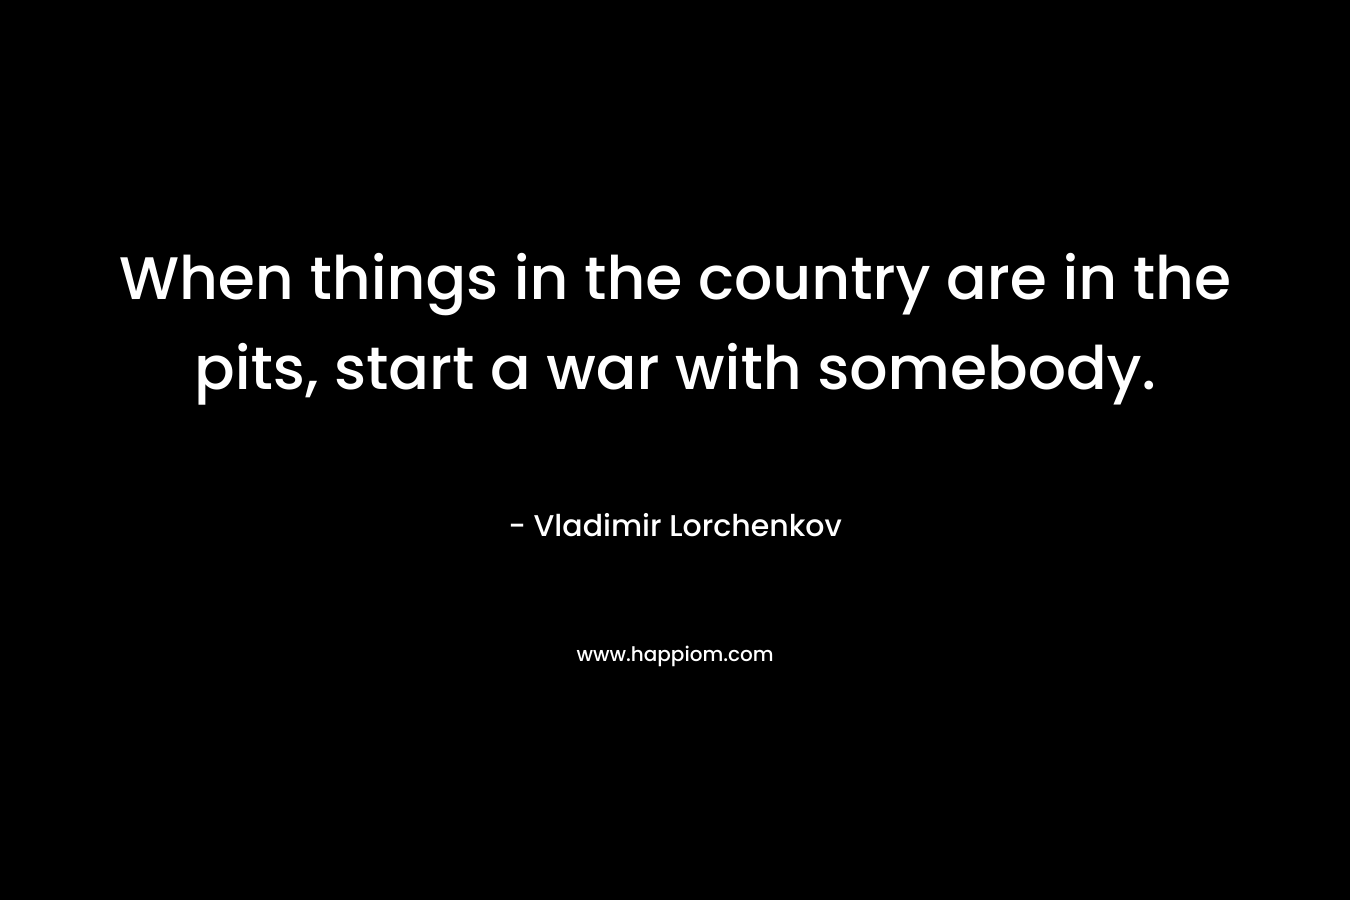 When things in the country are in the pits, start a war with somebody. – Vladimir Lorchenkov